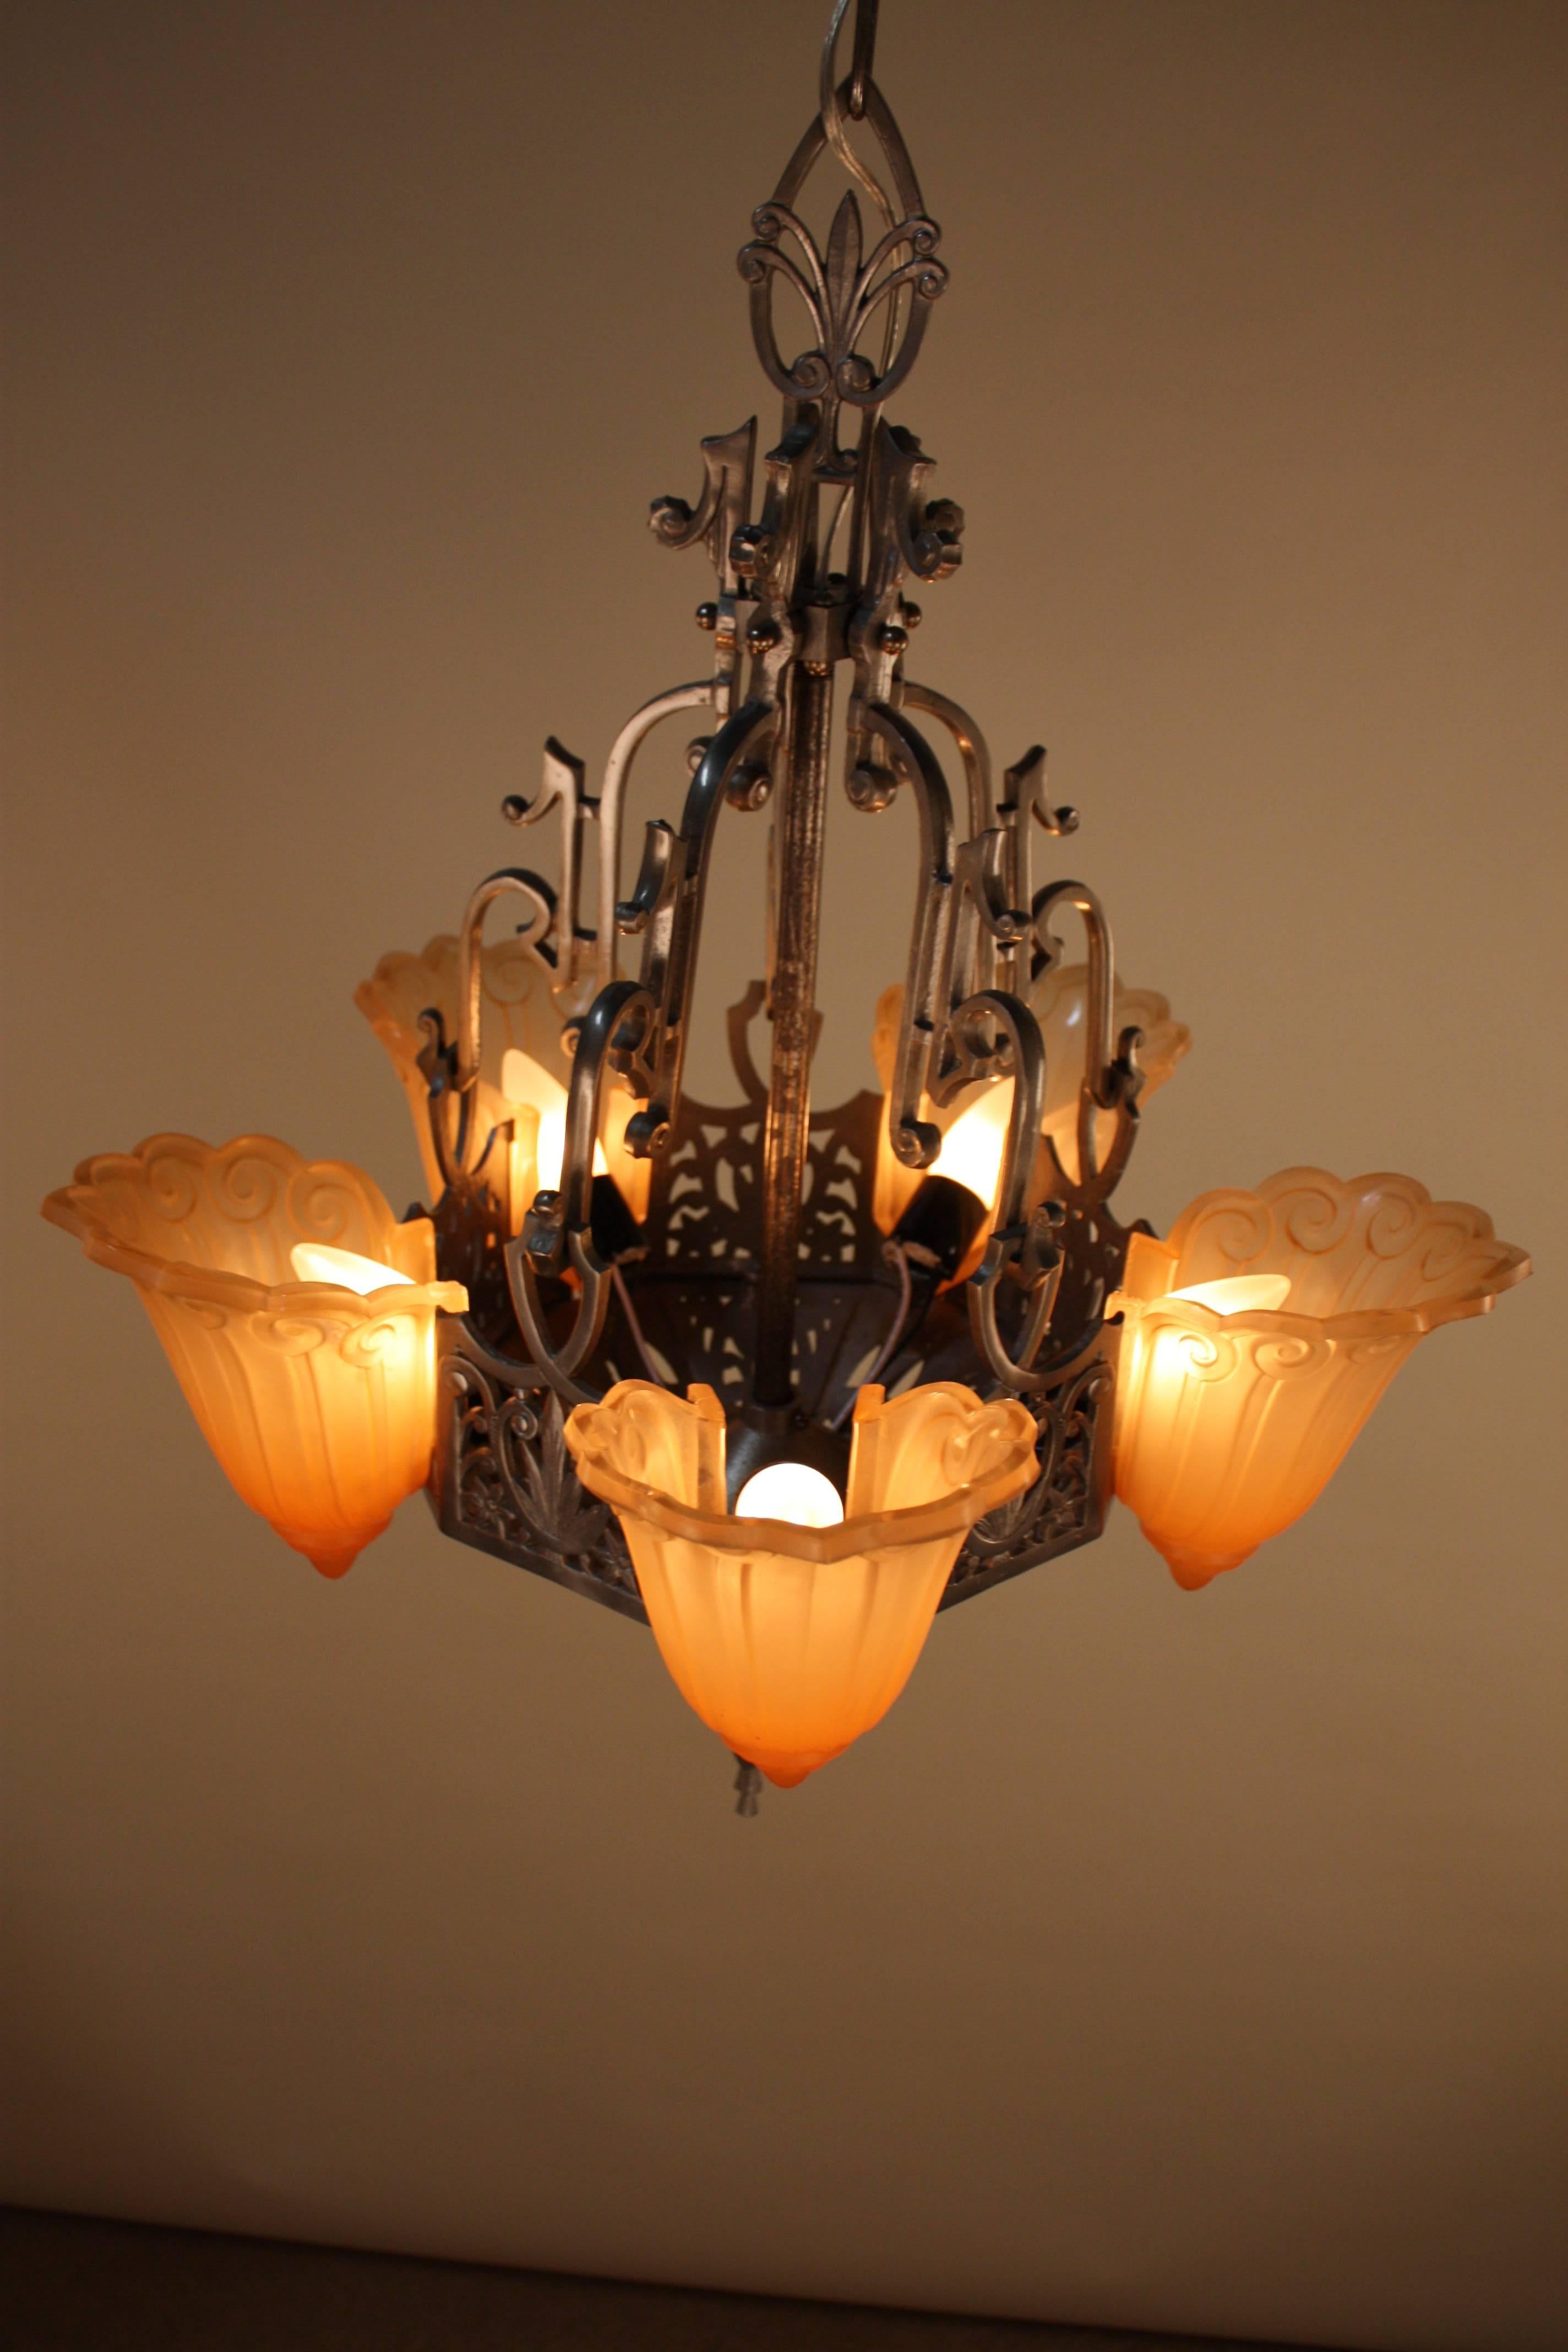 American Art Deco Five-Light Slip Shade Chandelier by Lincoln 3